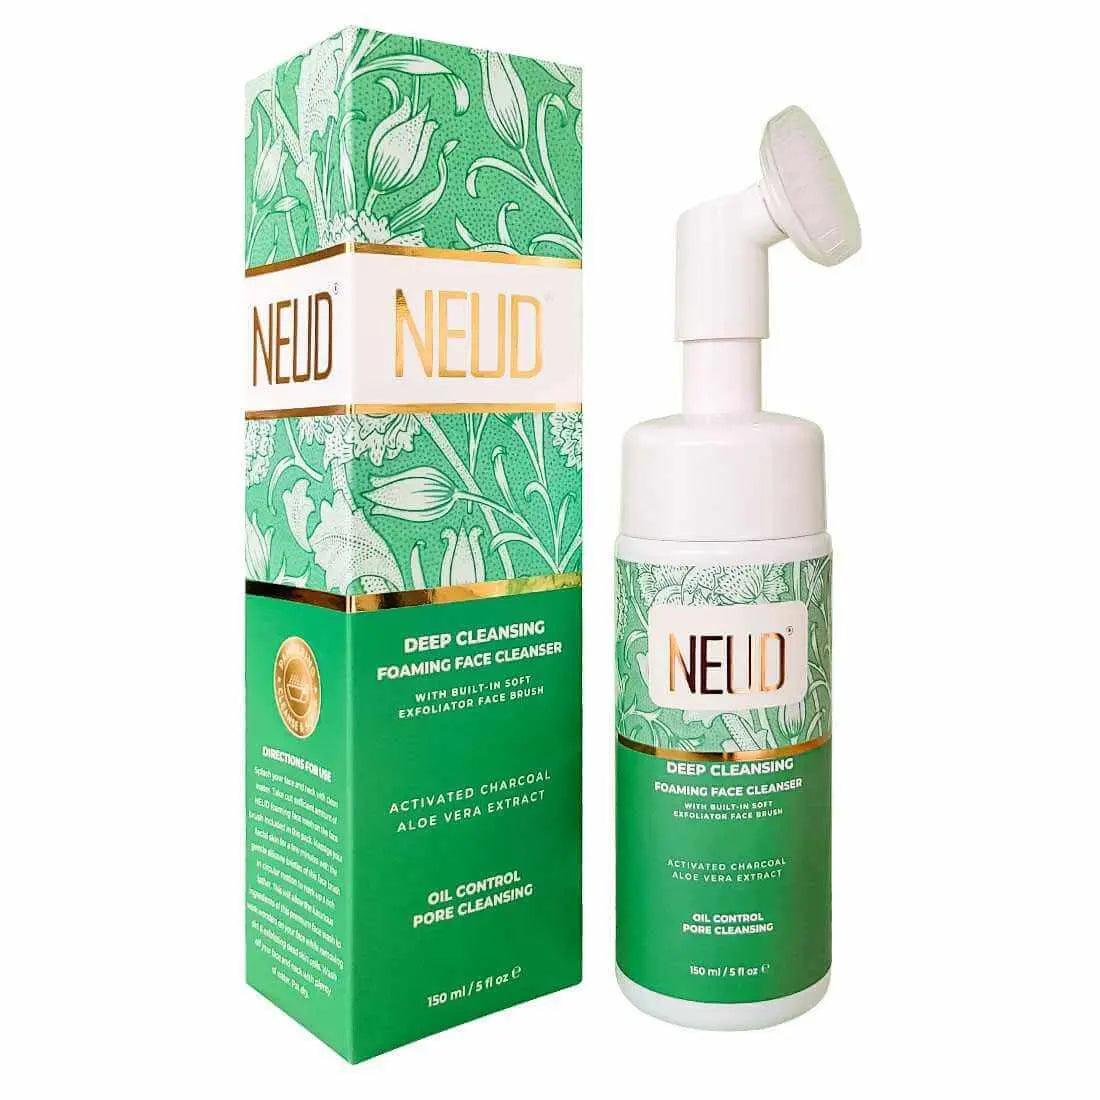 NEUD Deep Cleansing Foaming Face Cleanser With Activated Charcoal and Aloe Vera - 150 ml 8906116280676